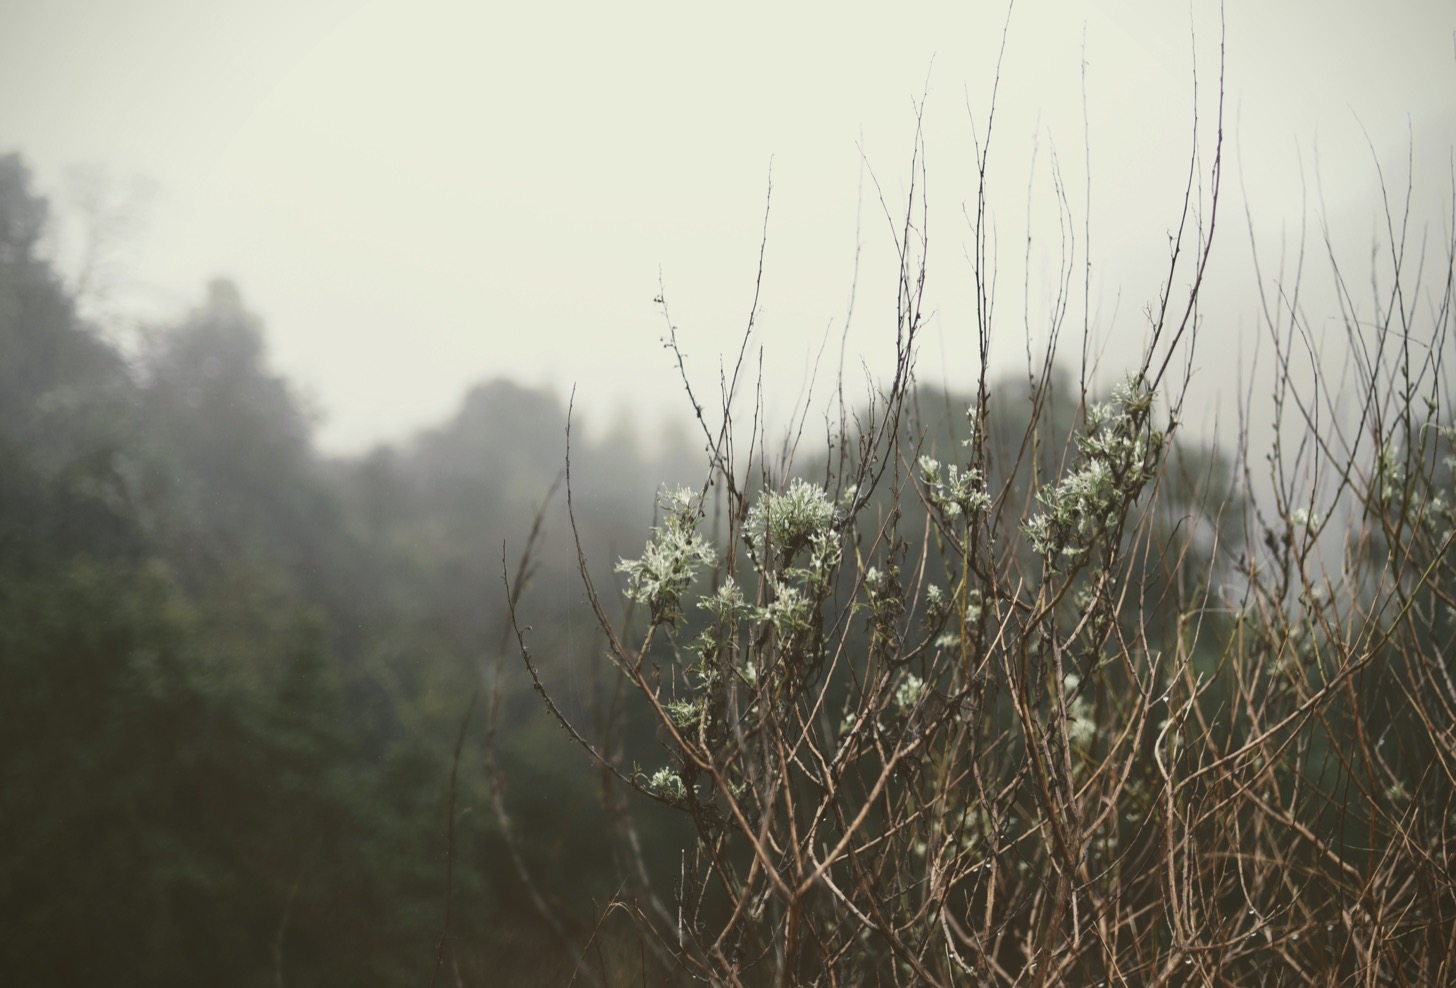 Tree branches and flowers in the fog.